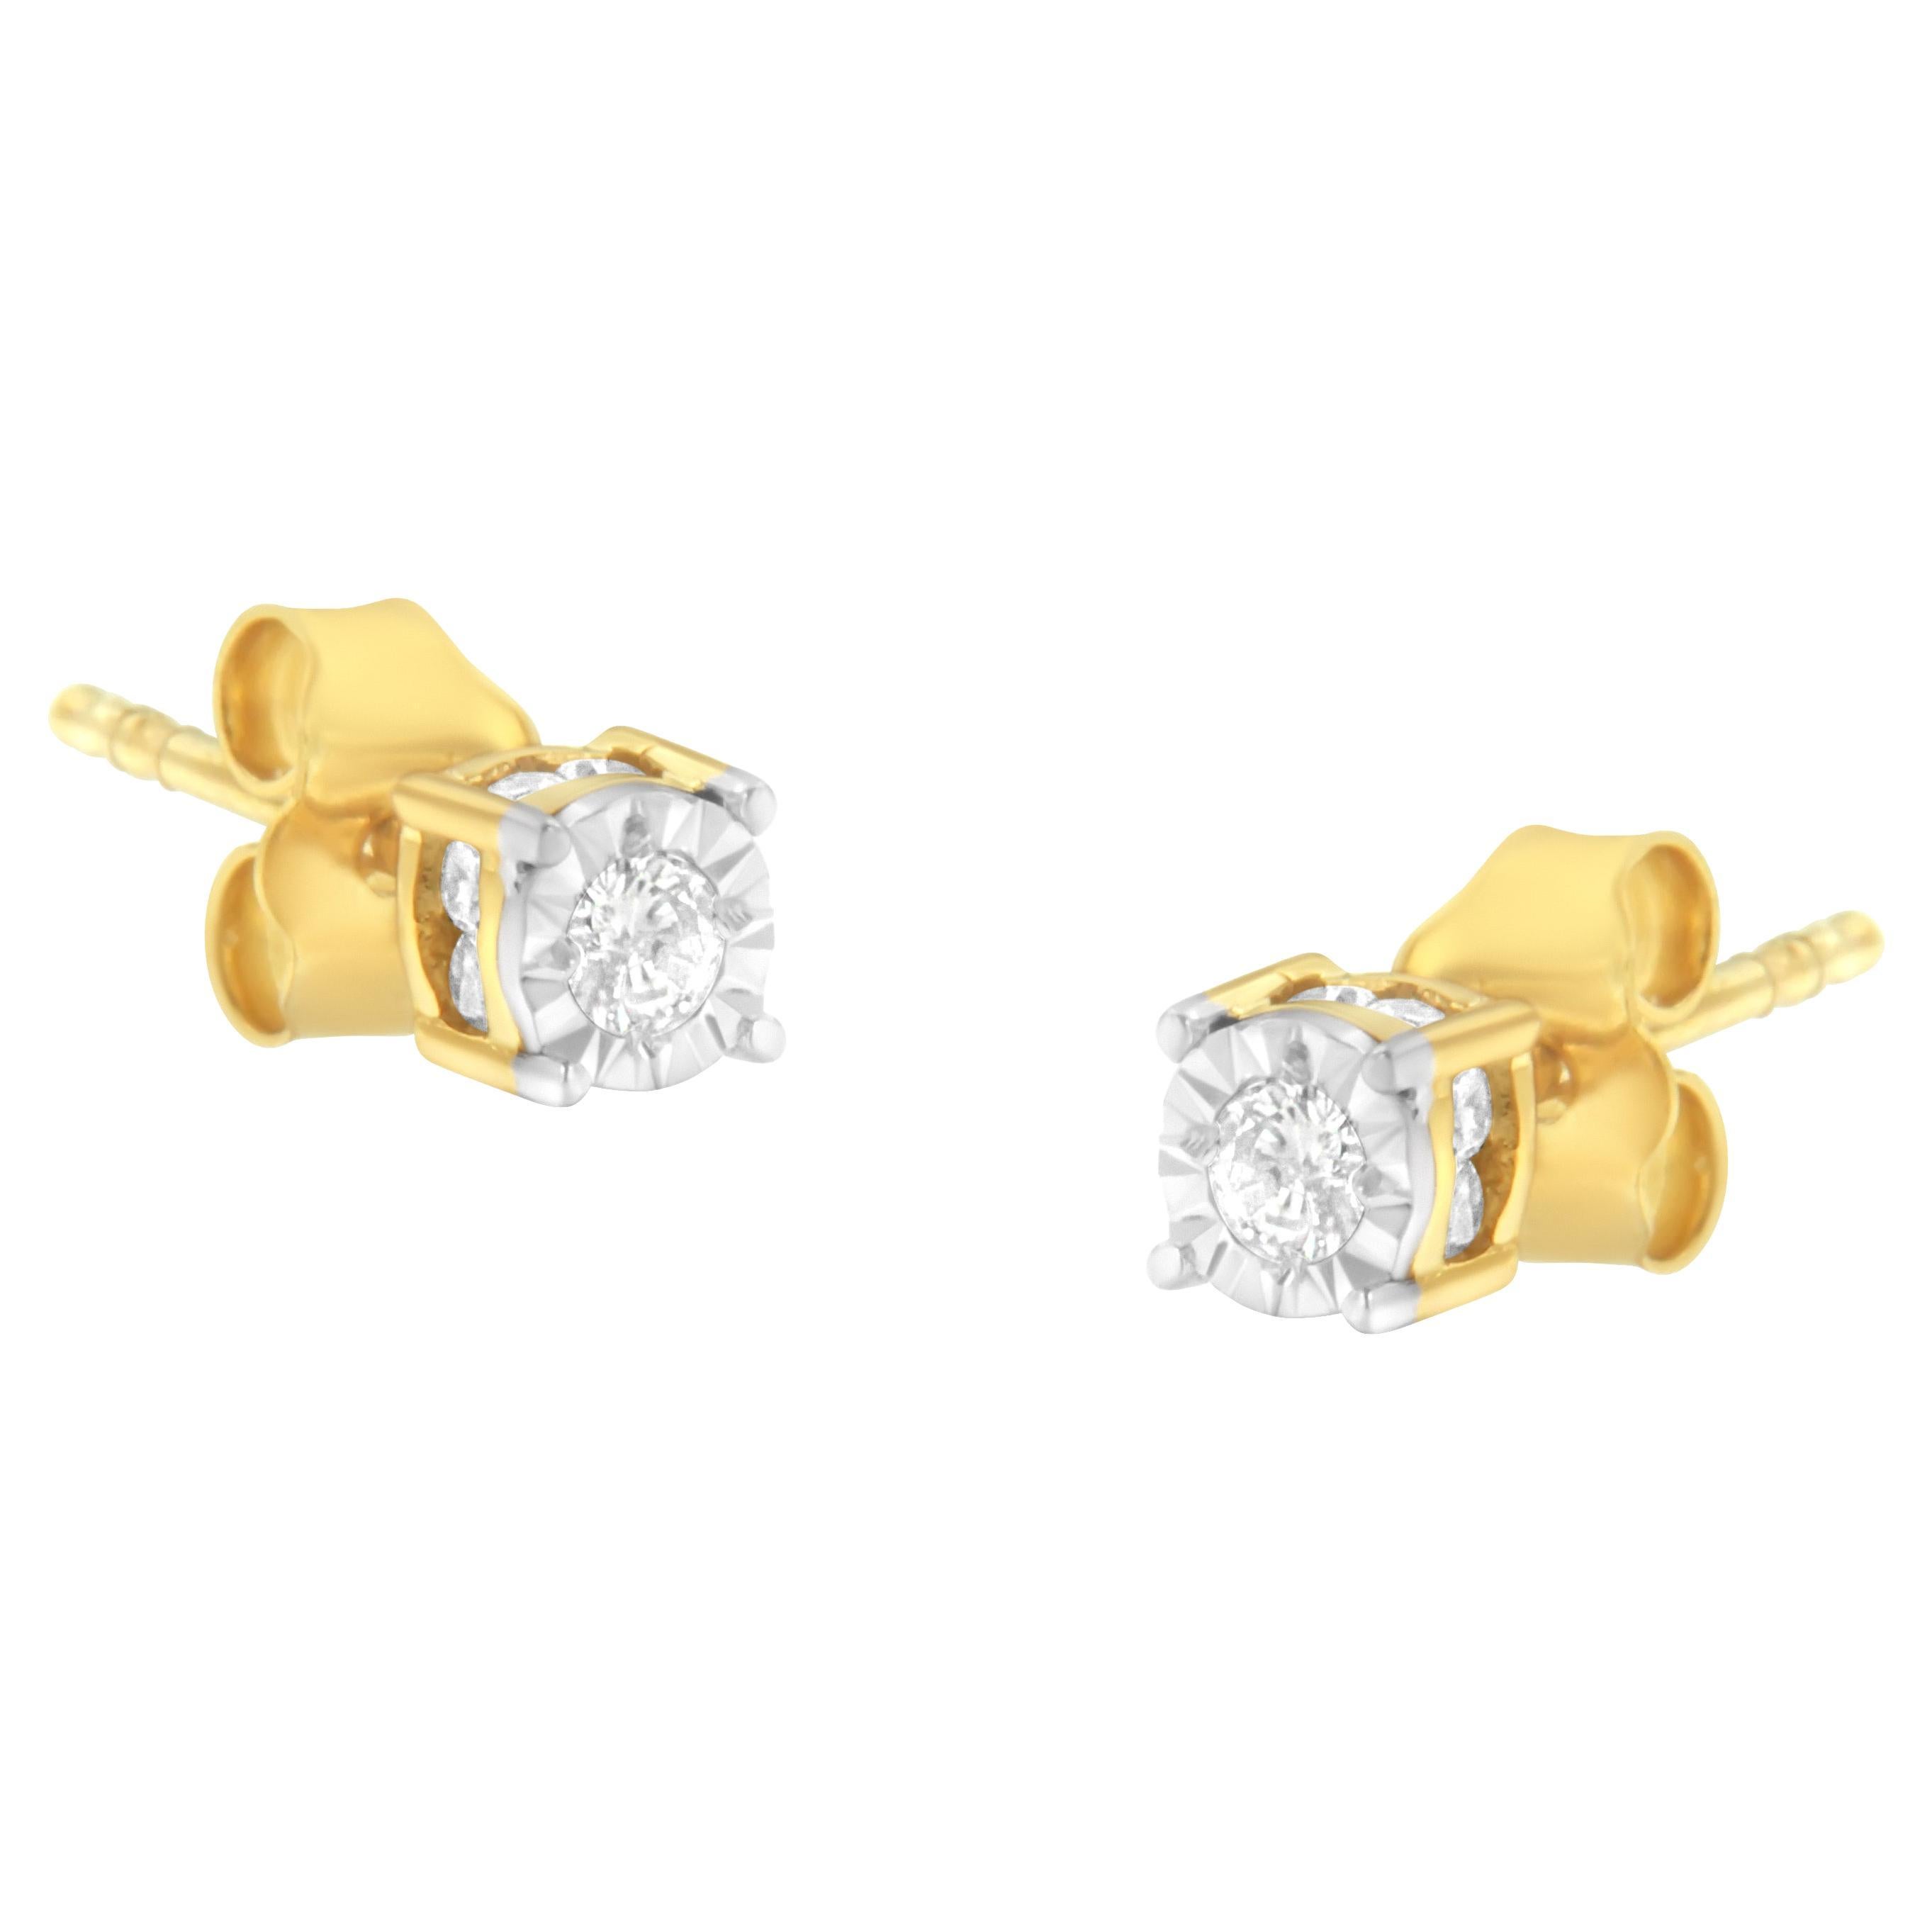 Yellow Gold Plated Sterling Silver 1/4 Carat Diamond Stud Earrings